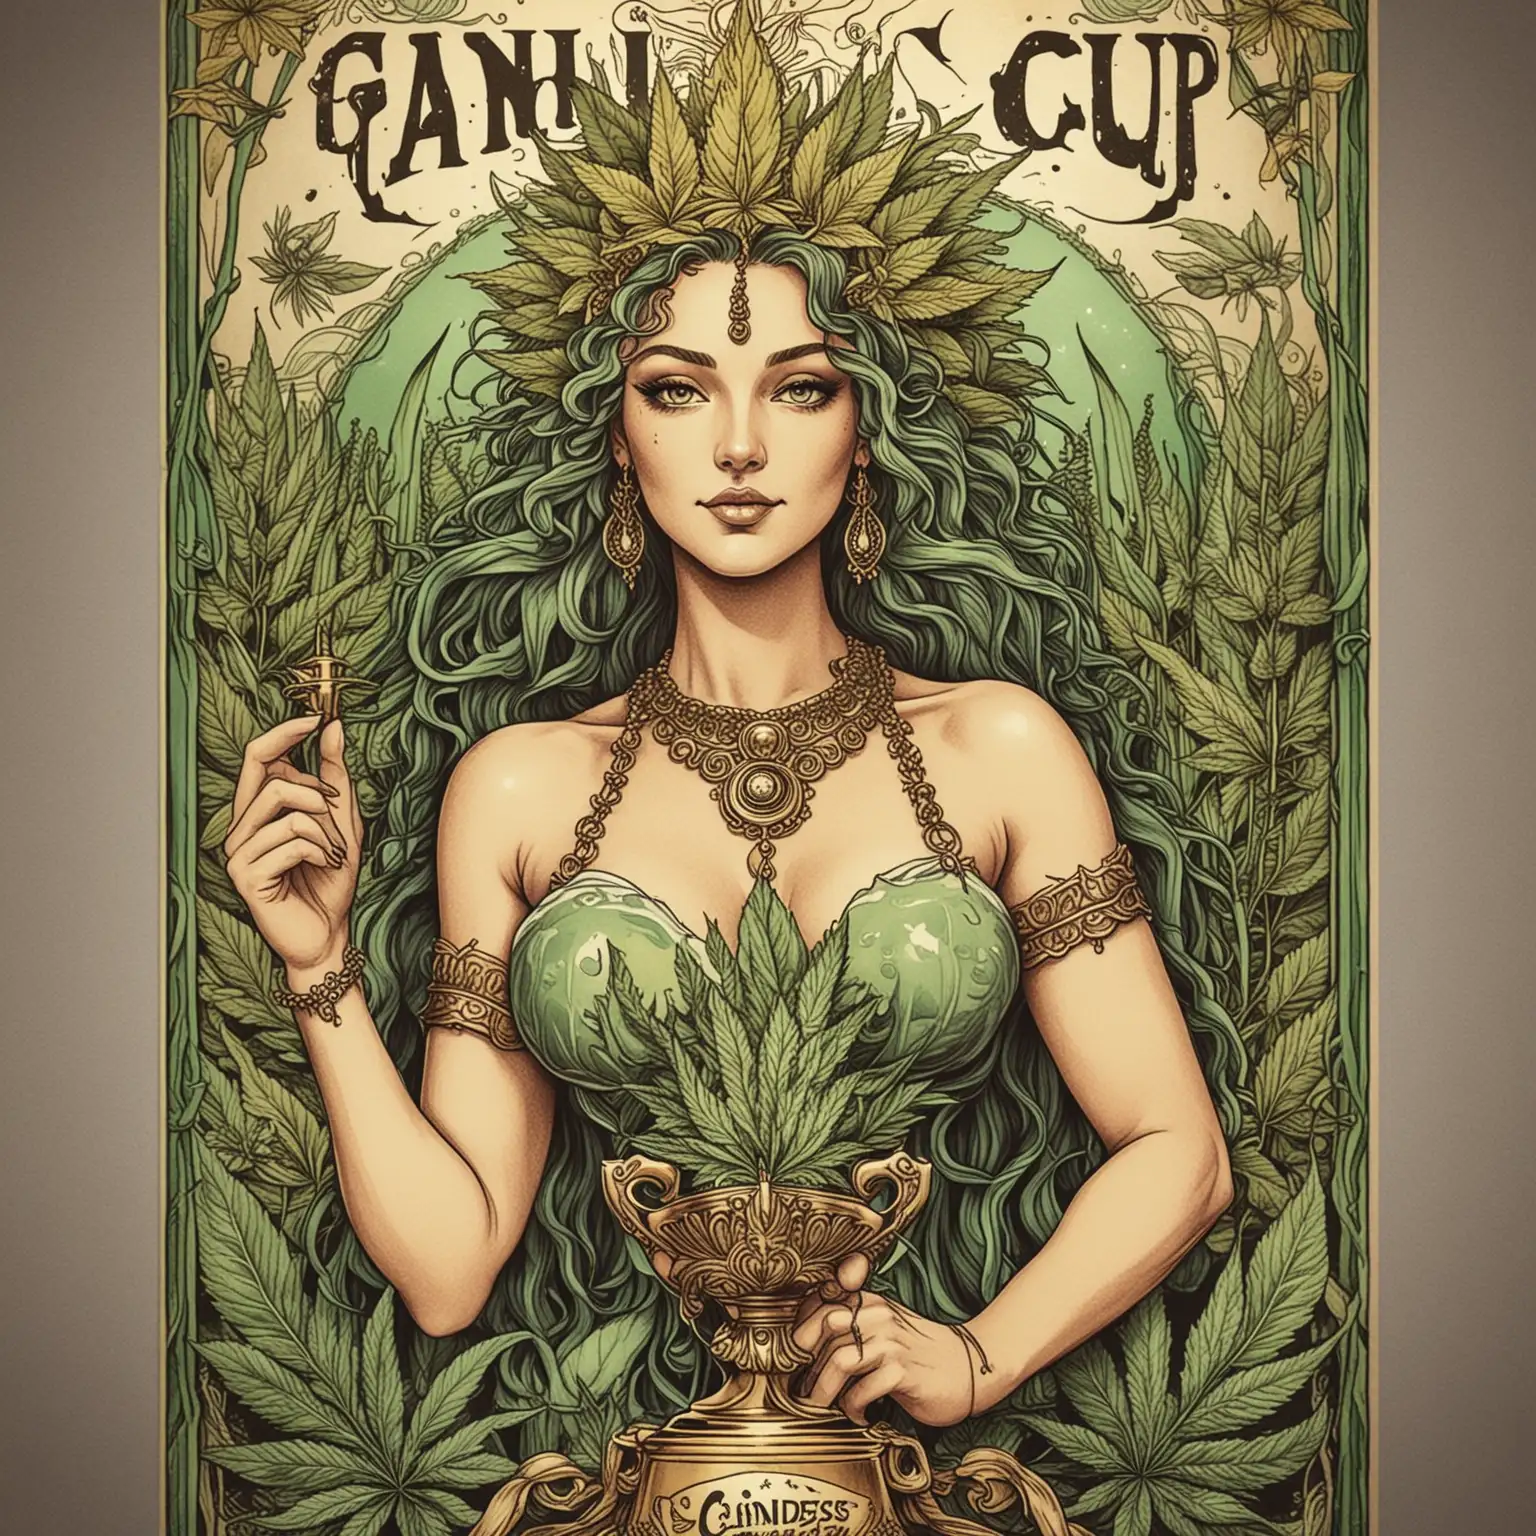 hand drawn cannabis cup poster with a trophy and goddess